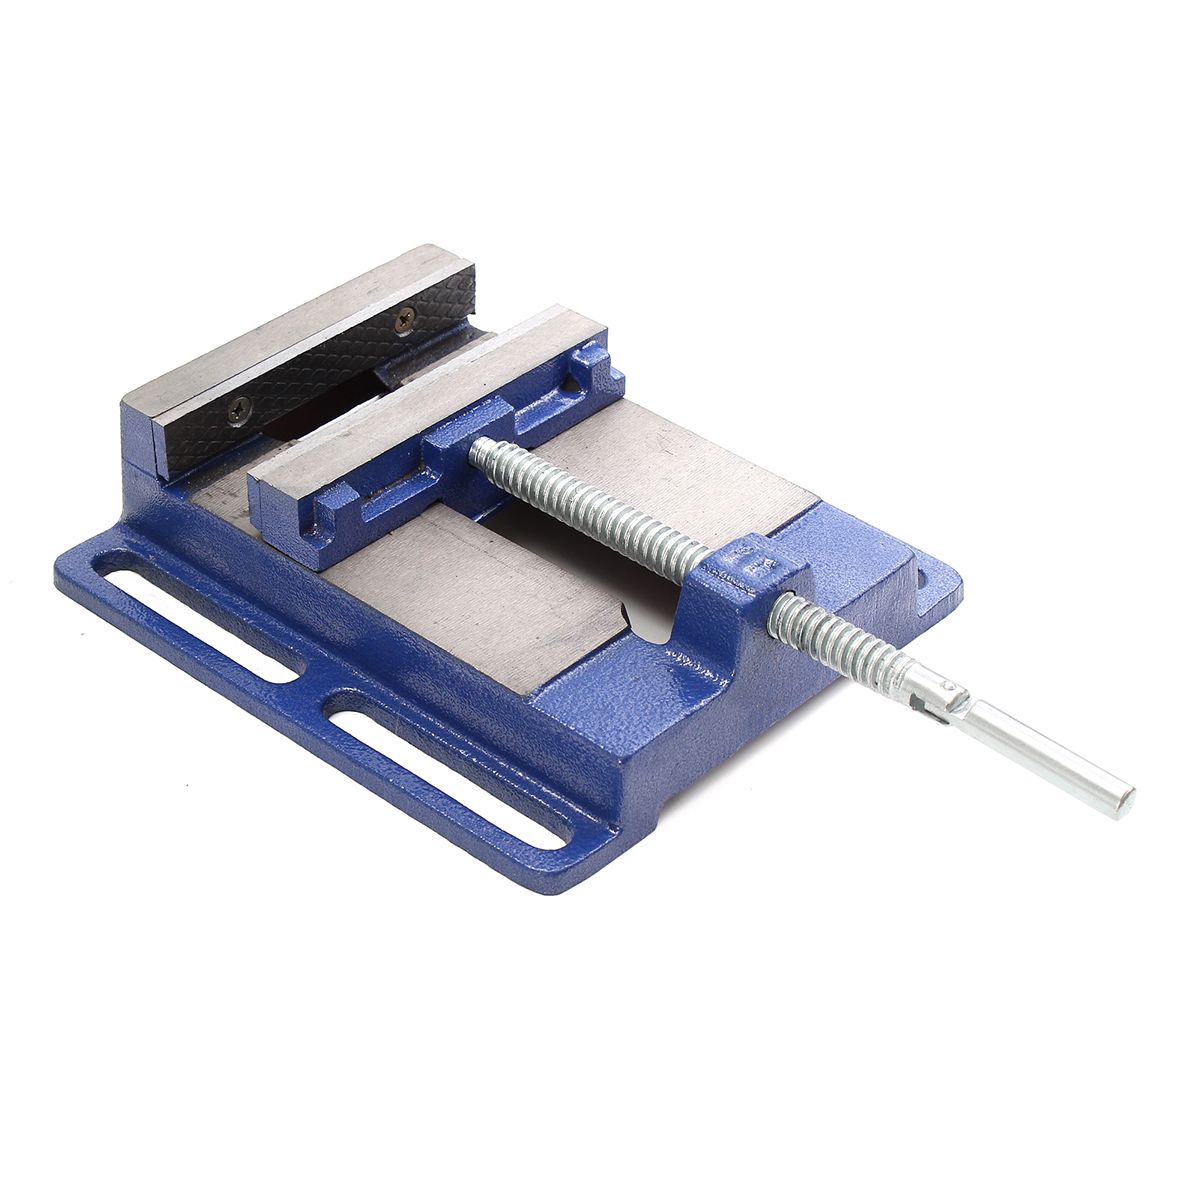 6-Inch-Heavy-Duty-JAW-Drill-Press-Vice-Bench-Clamp-Woodworking-Drilling-1682812